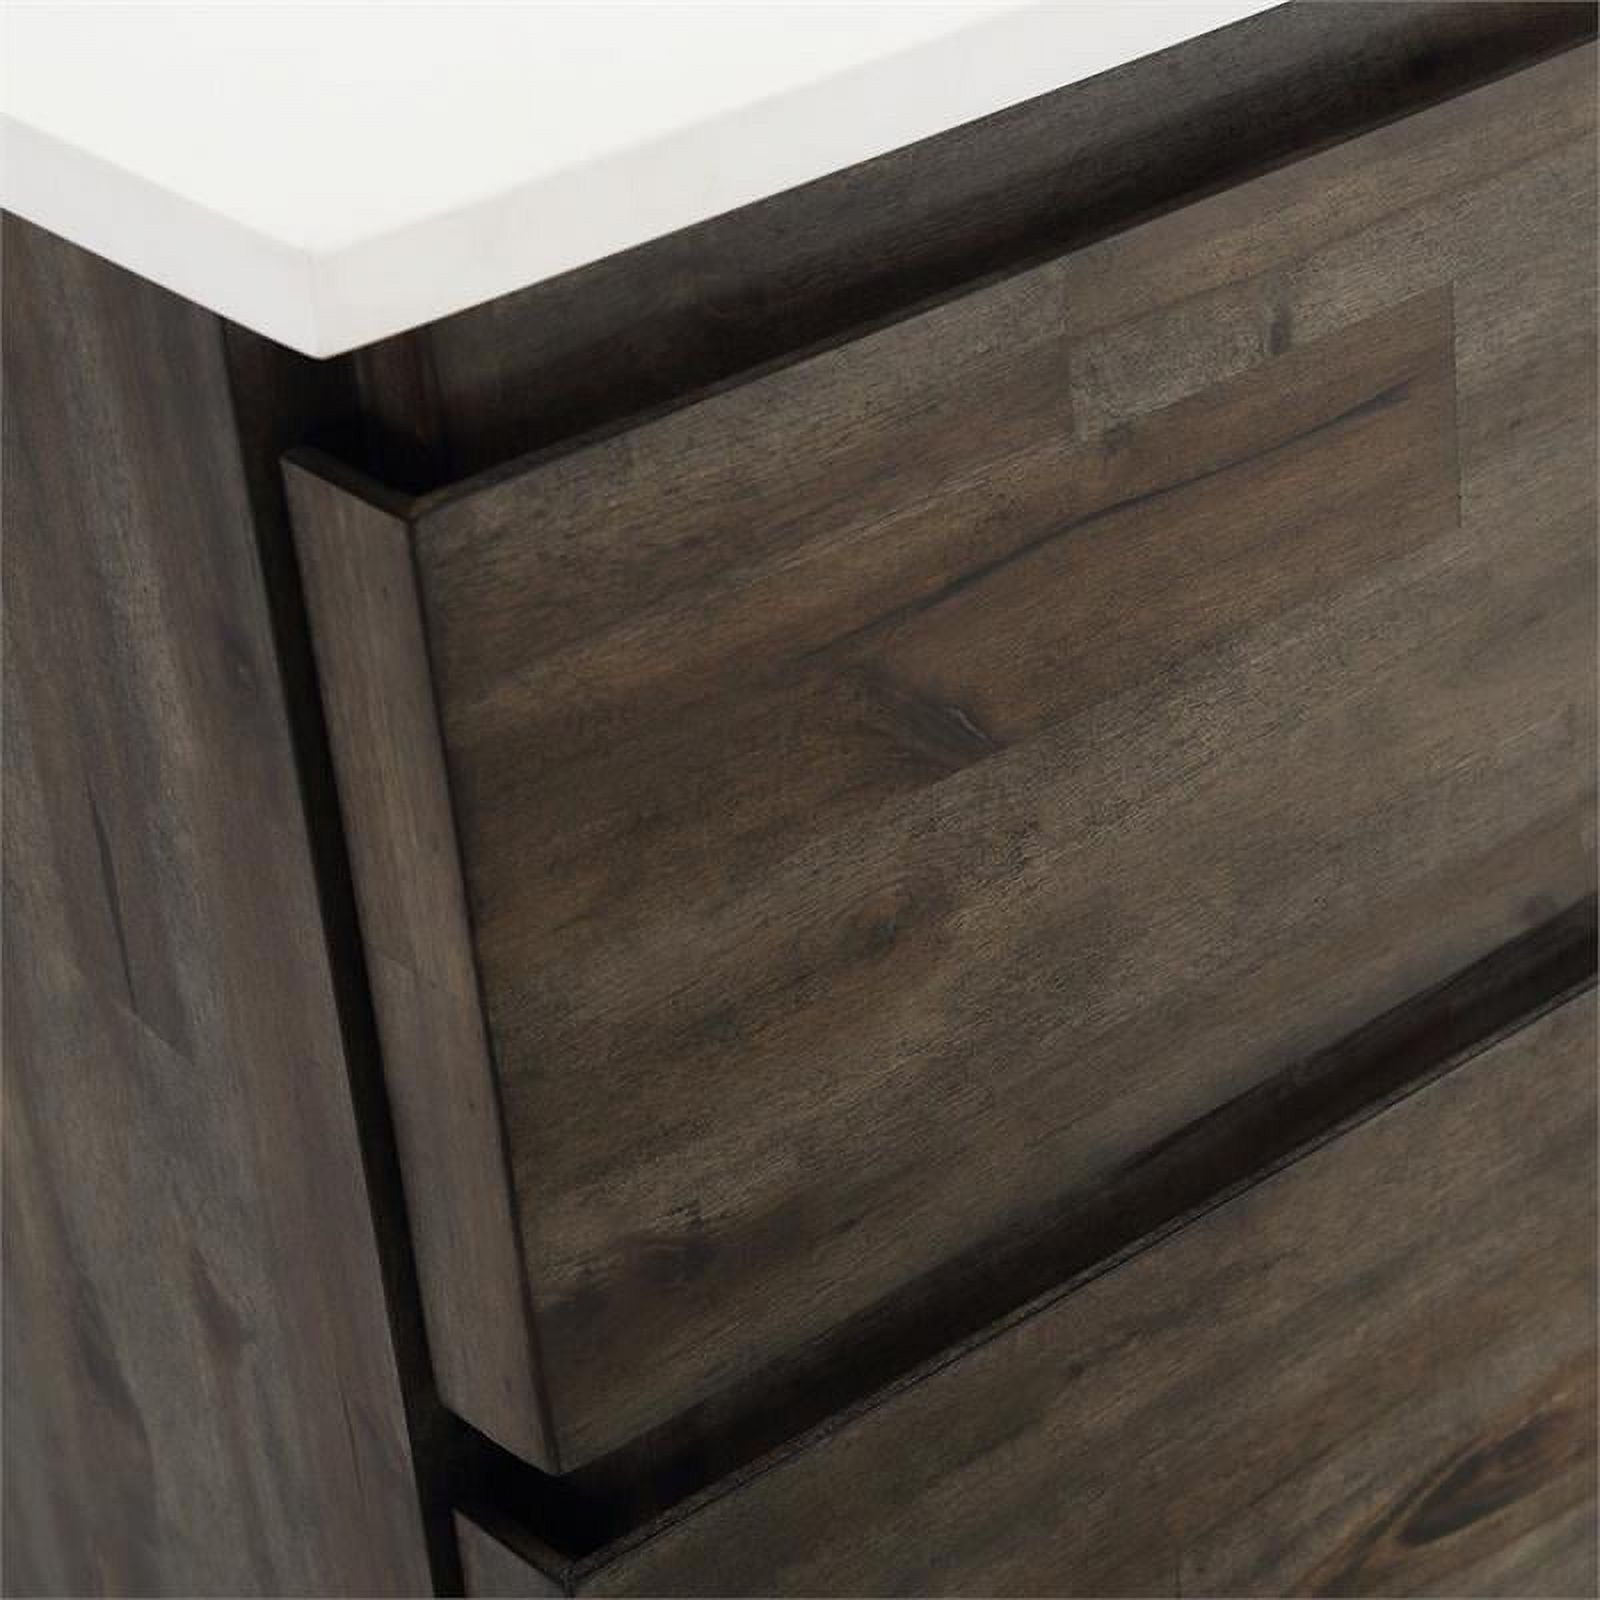 Fresca Formosa 72" Double Sinks Modern Acacia Wood Bathroom Cabinet in Brown - image 3 of 10